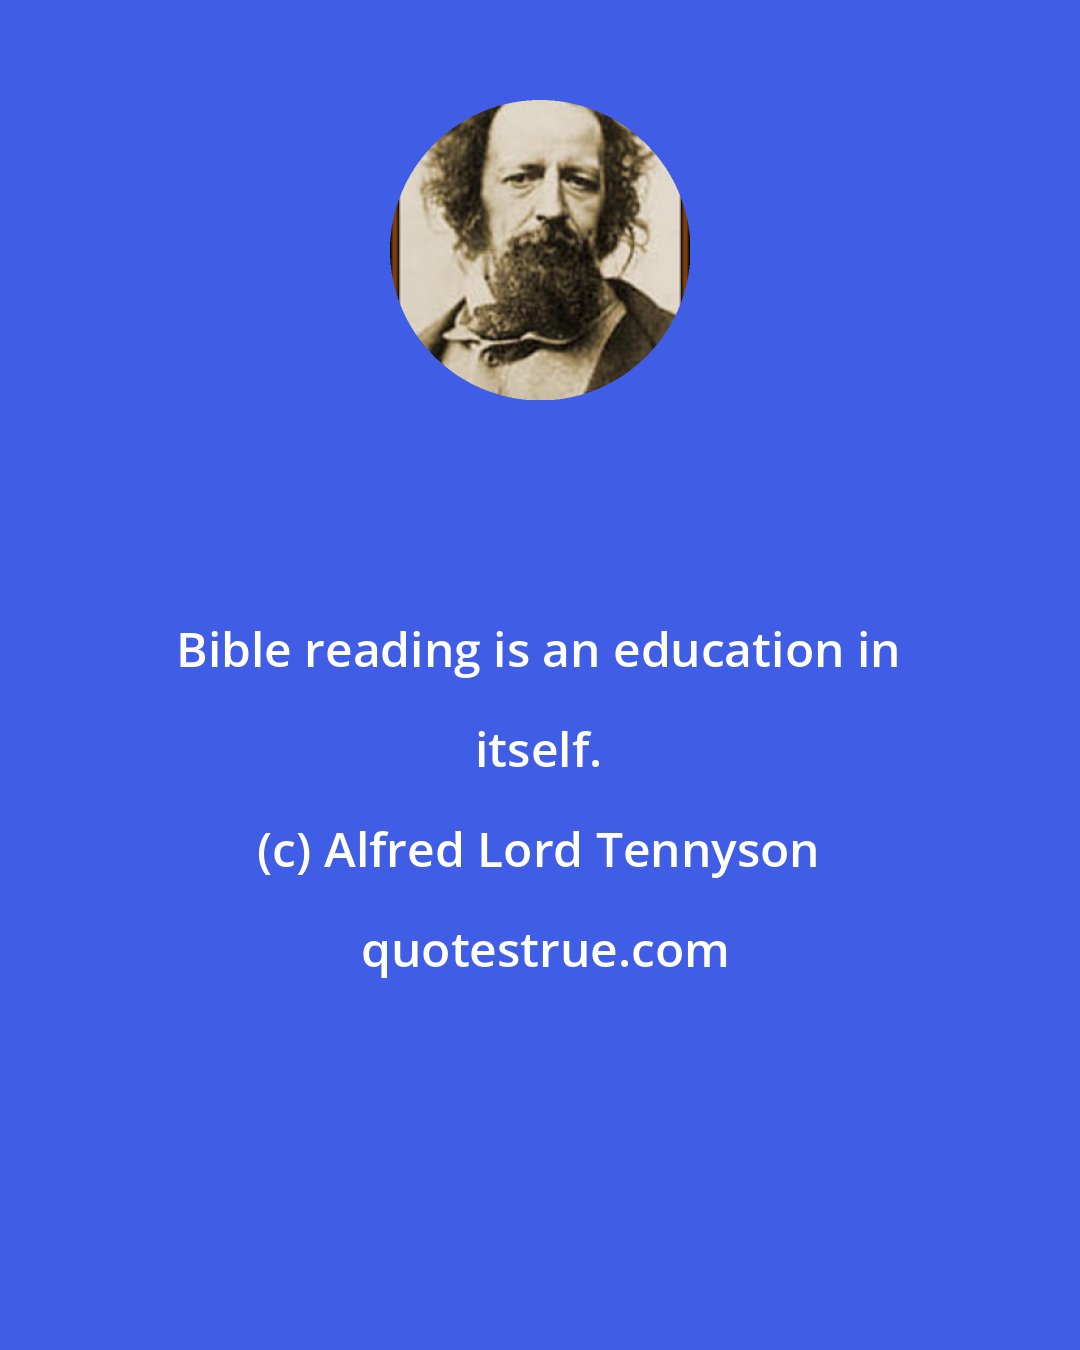 Alfred Lord Tennyson: Bible reading is an education in itself.